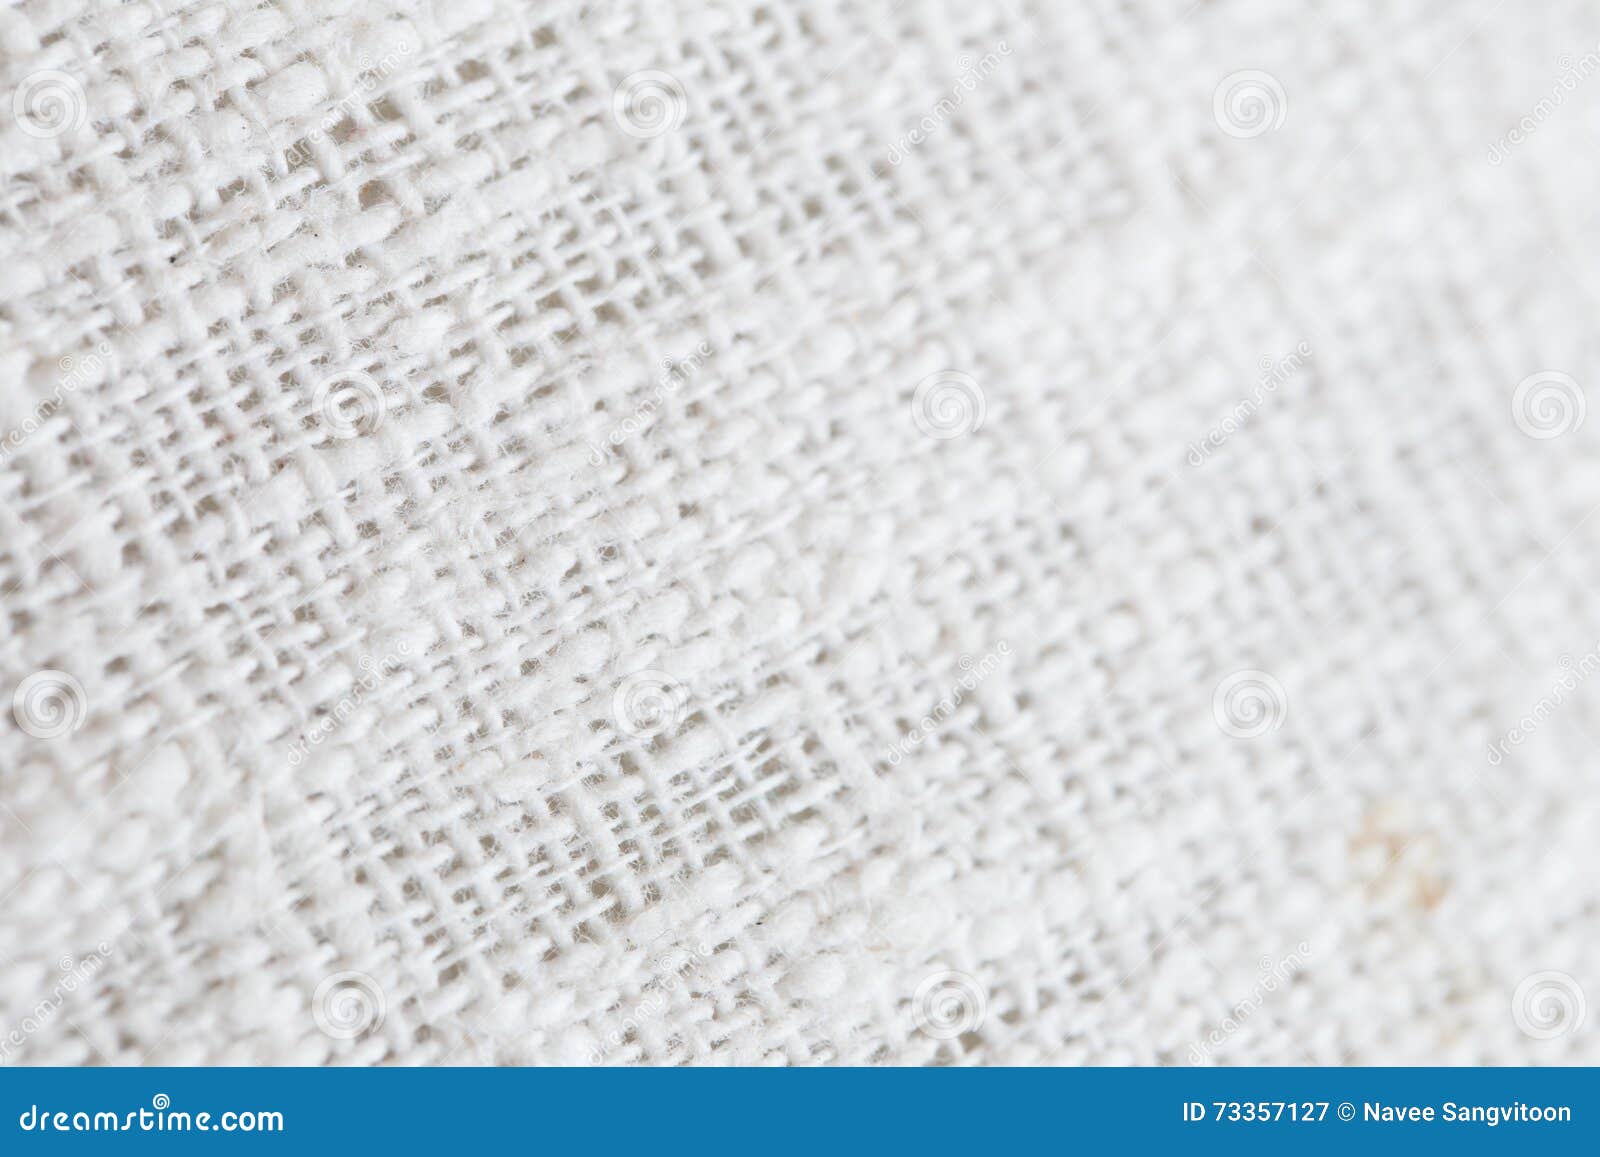 Close Up Detail View of a Piece of Linen Cloth Showing the Pattern of the  Weave of a Natural Fabric Stock Image - Image of linen, indoors: 73357127